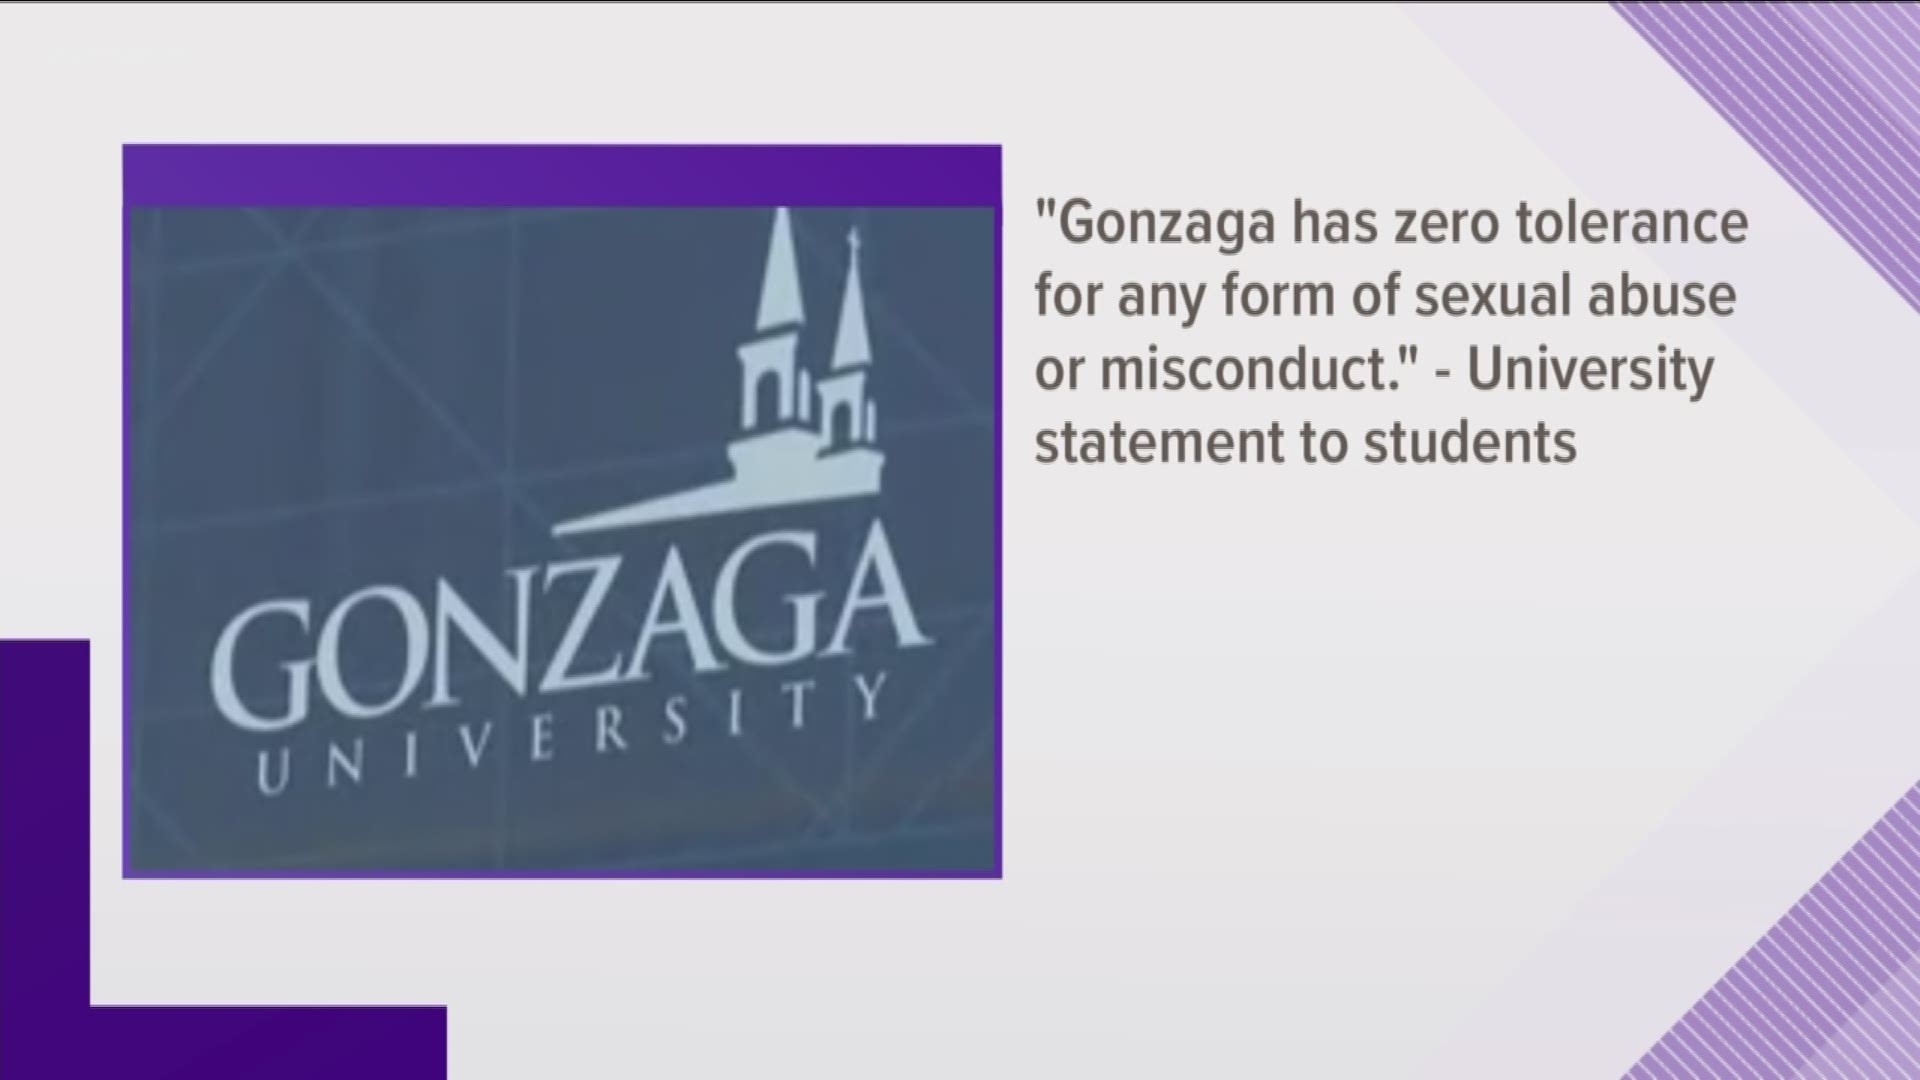 A sexual assault was reported on the Gonzaga campus on Jan. 25, 2019.